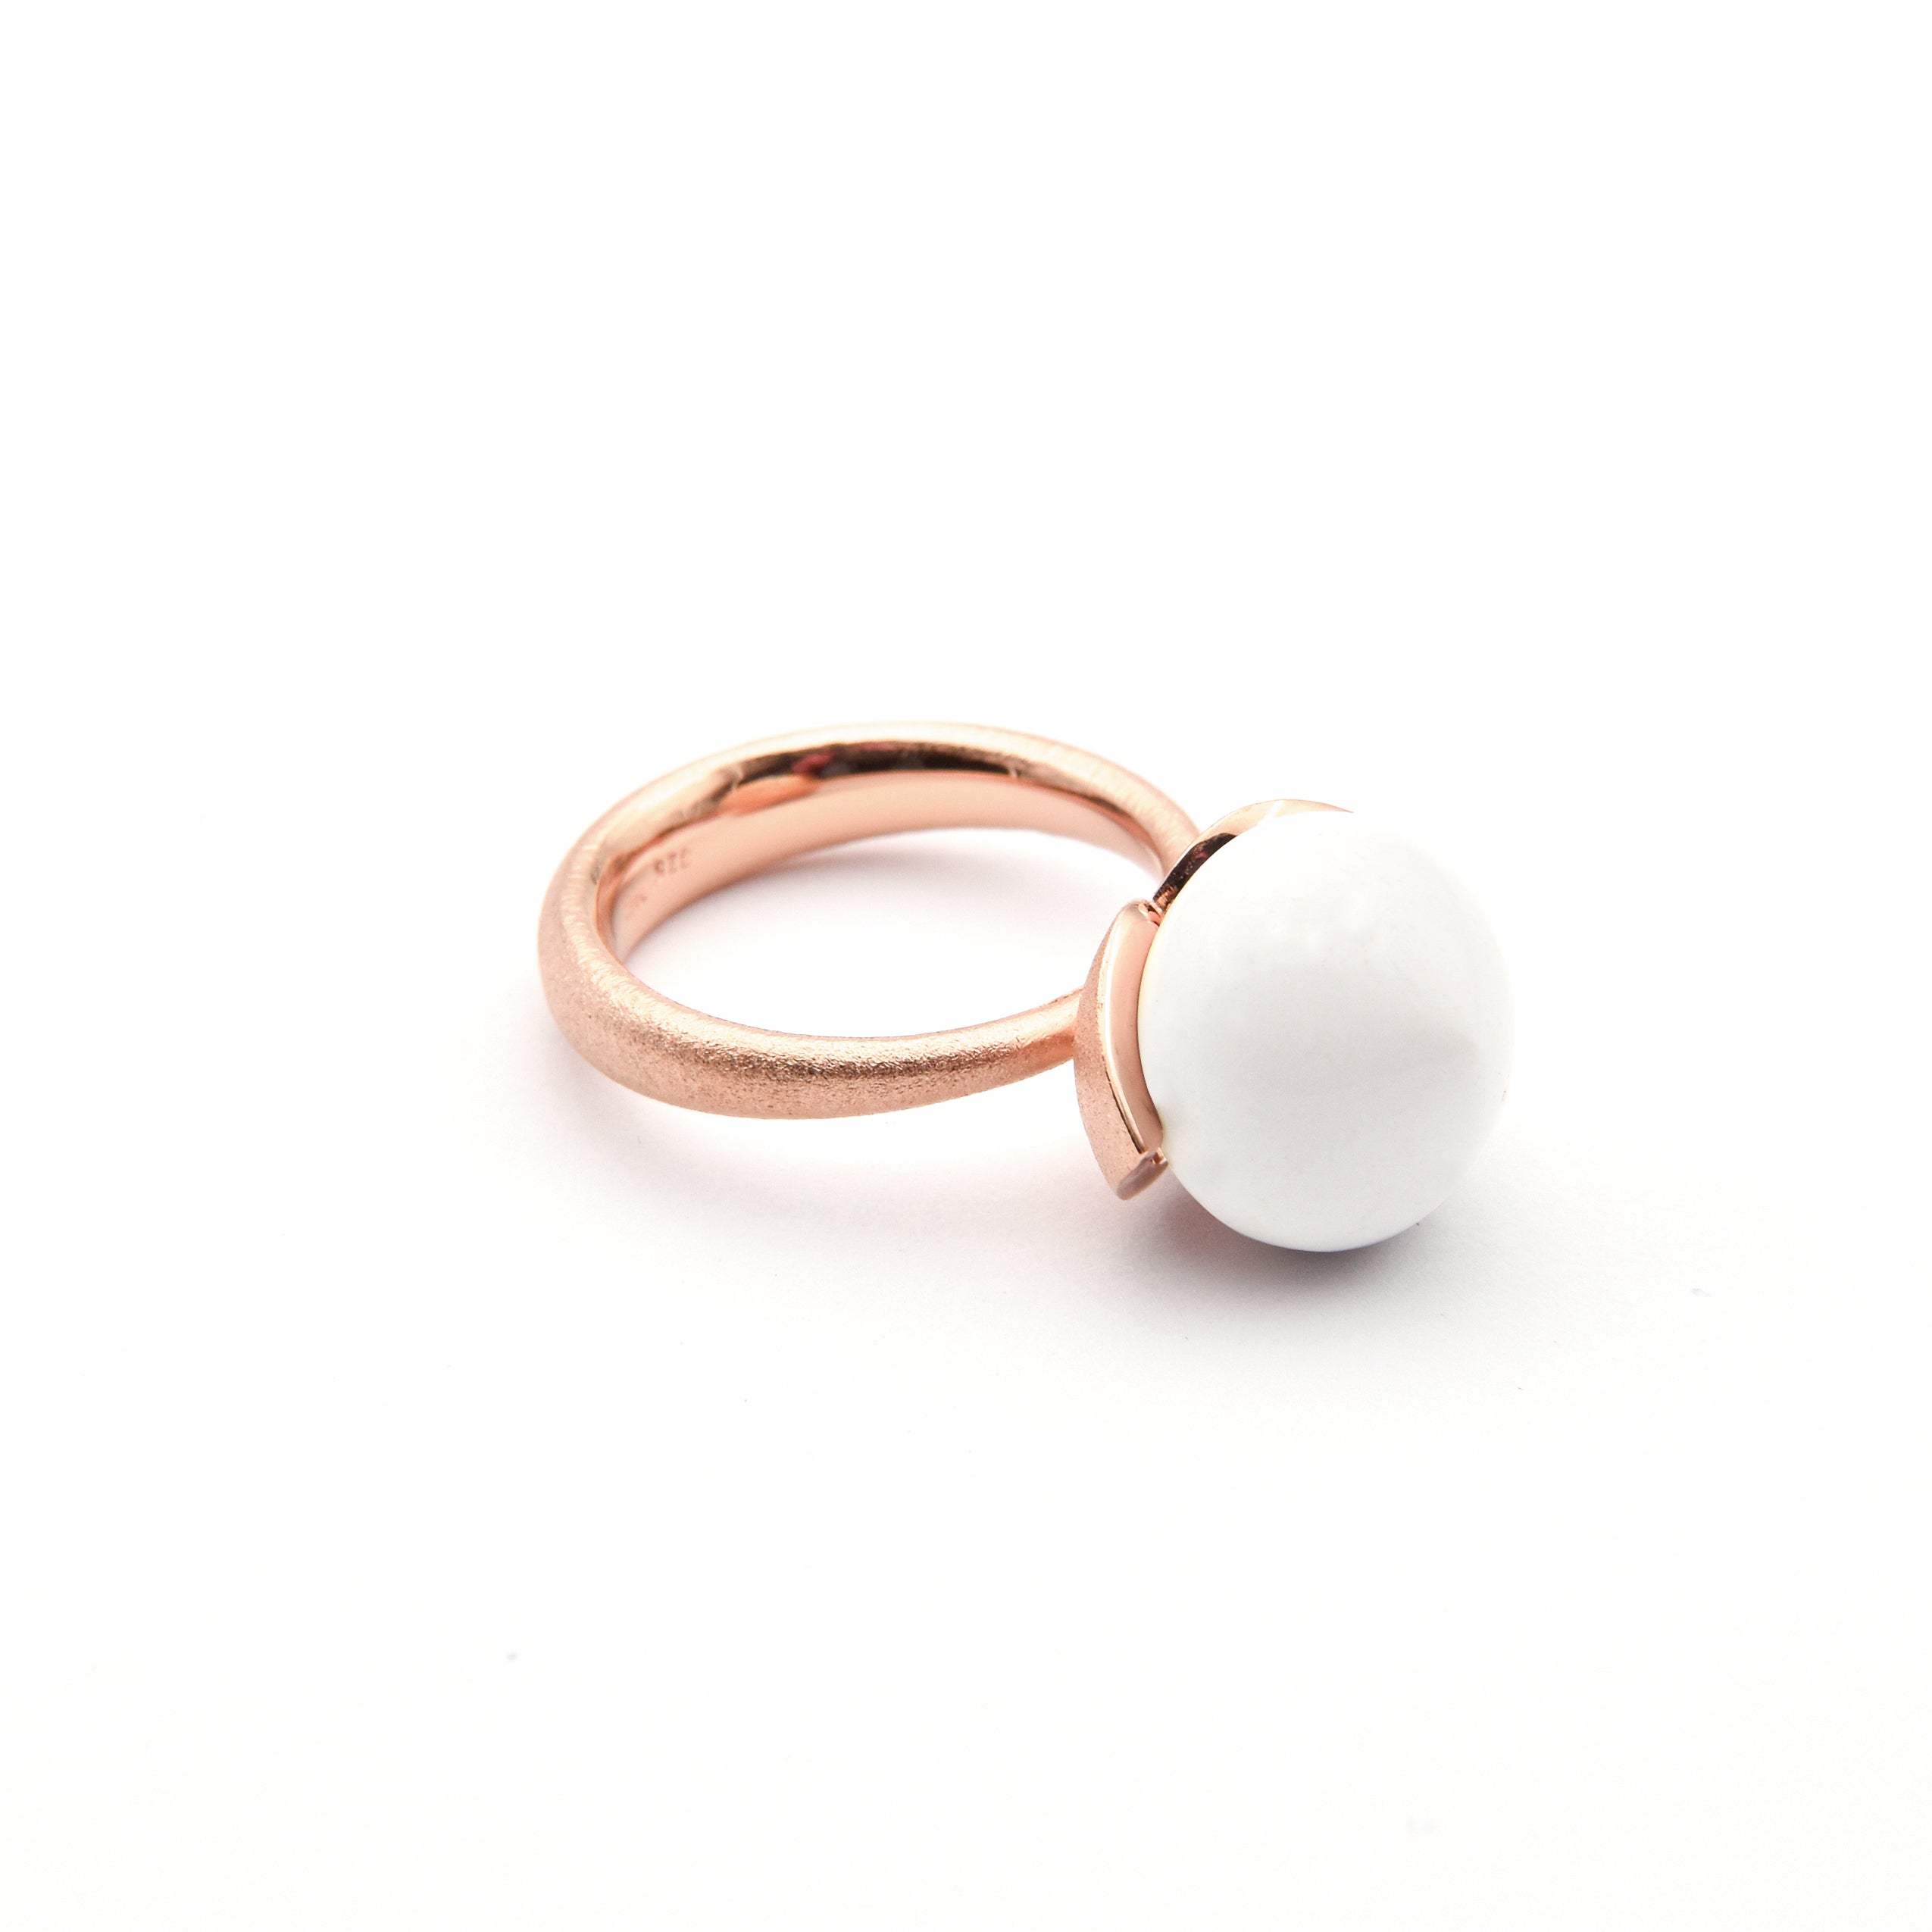 Dolce ring "big" with Kascholong 925/-